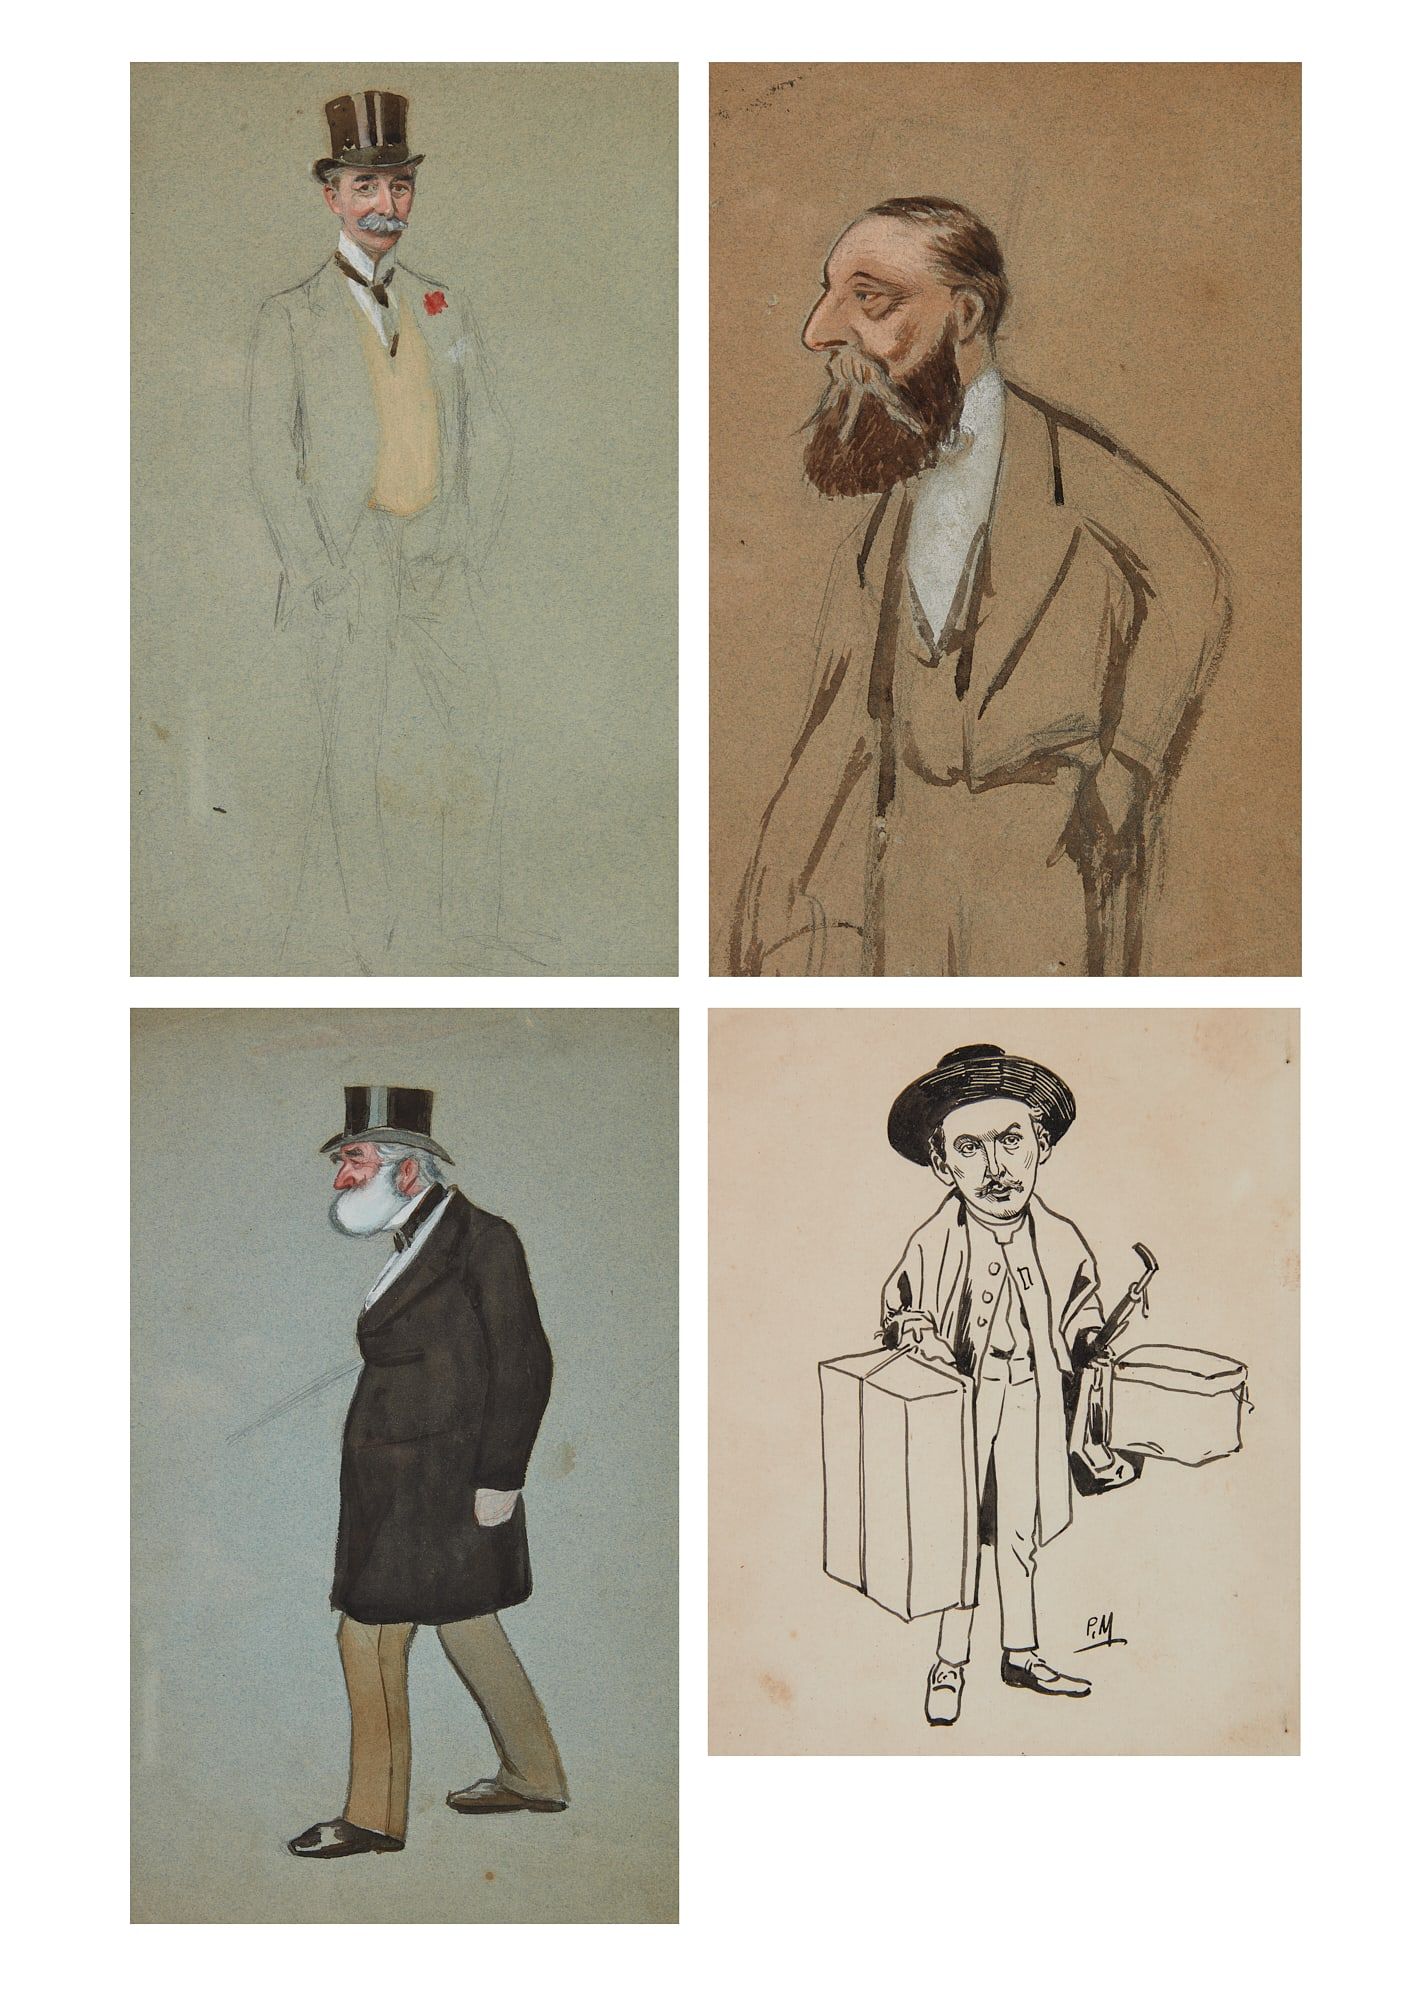 GROUP OF FOUR CARICATURE ILLUSTRATIONSGroup